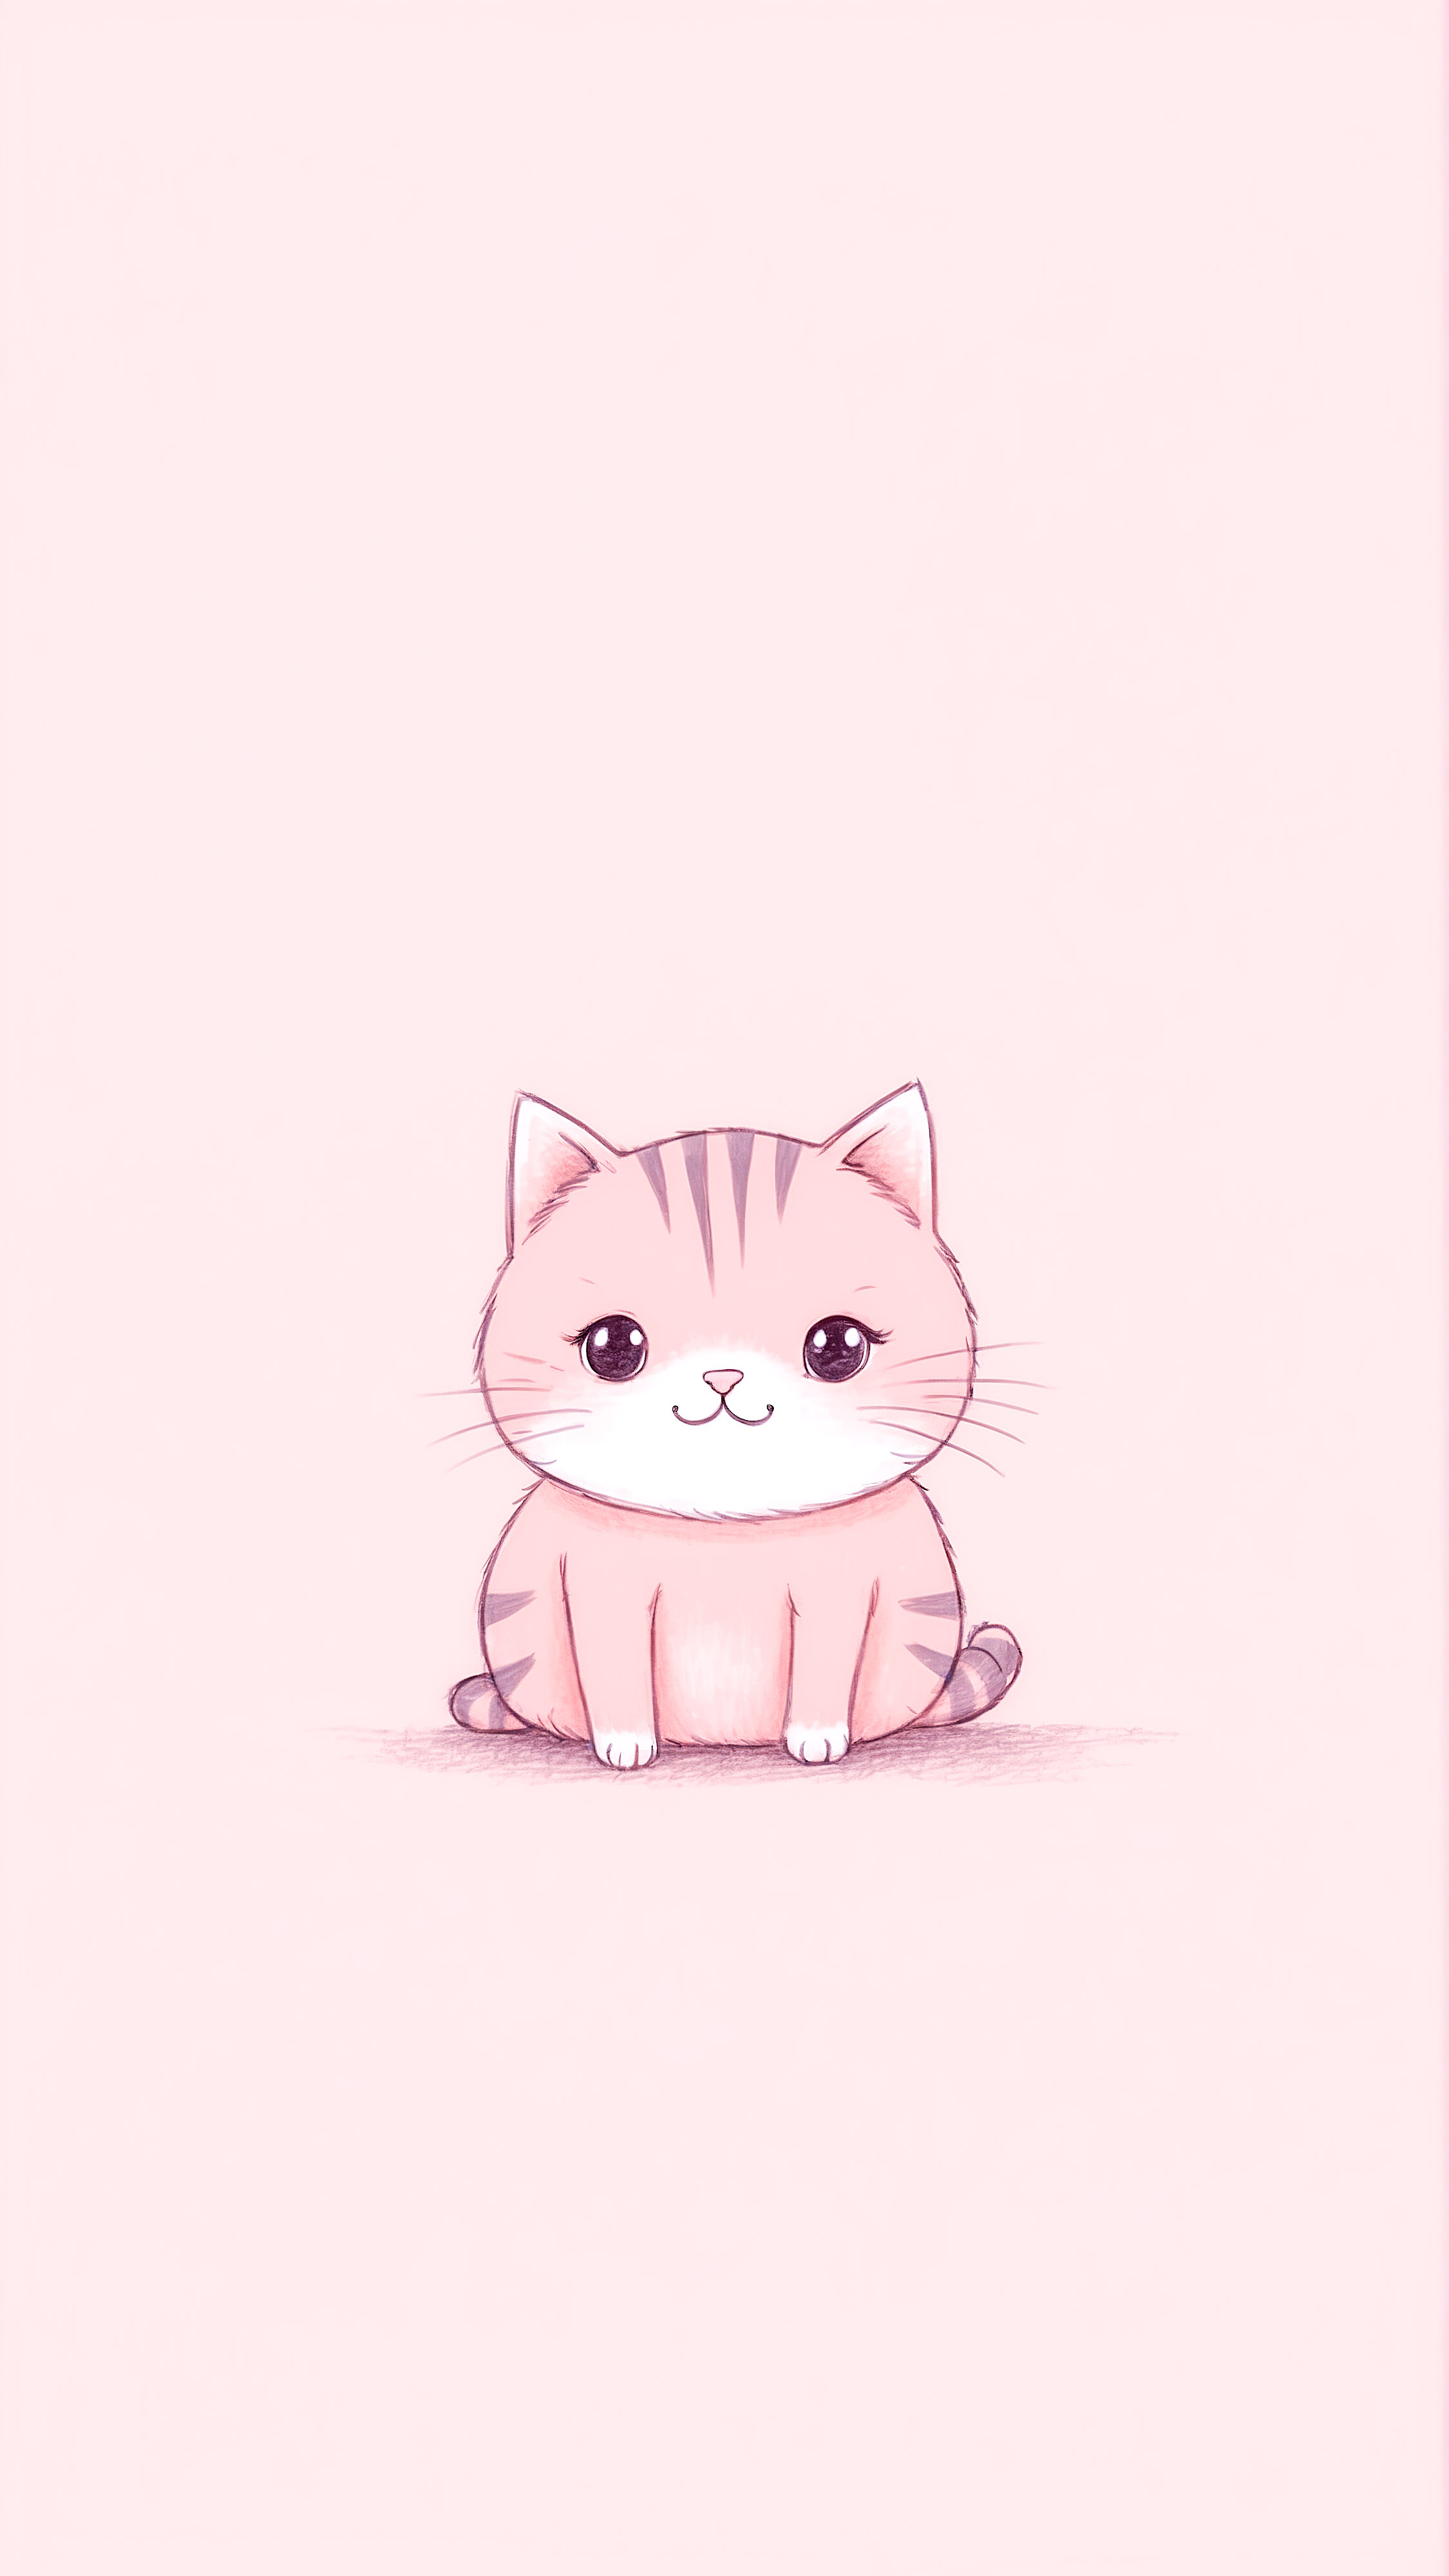 Enjoy the beauty and style of a simple and adorable cute cat on a soft, pastel peach-colored background with our aesthetic iPhone backgrounds.